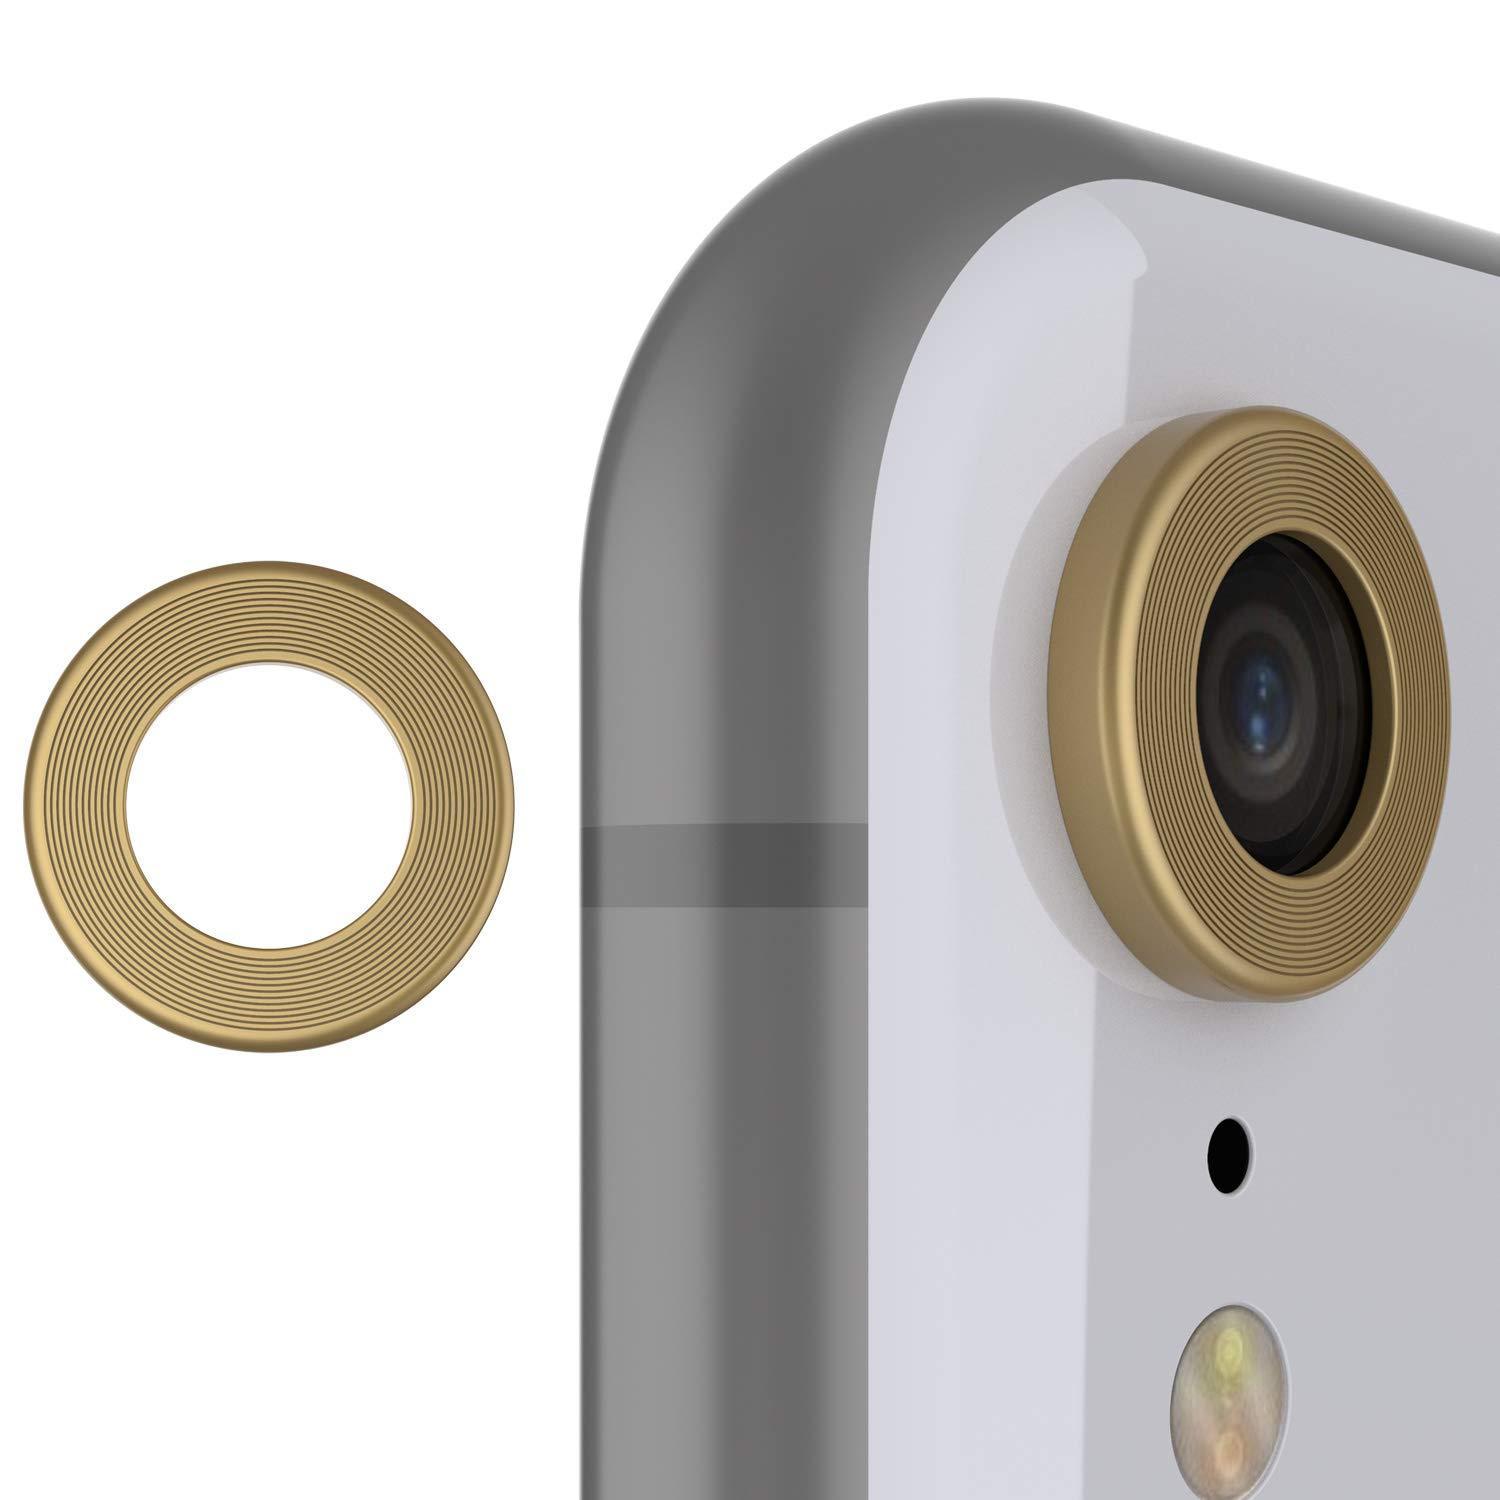 Punkcase iPhone 11 Camera Protector Ring [Gold]